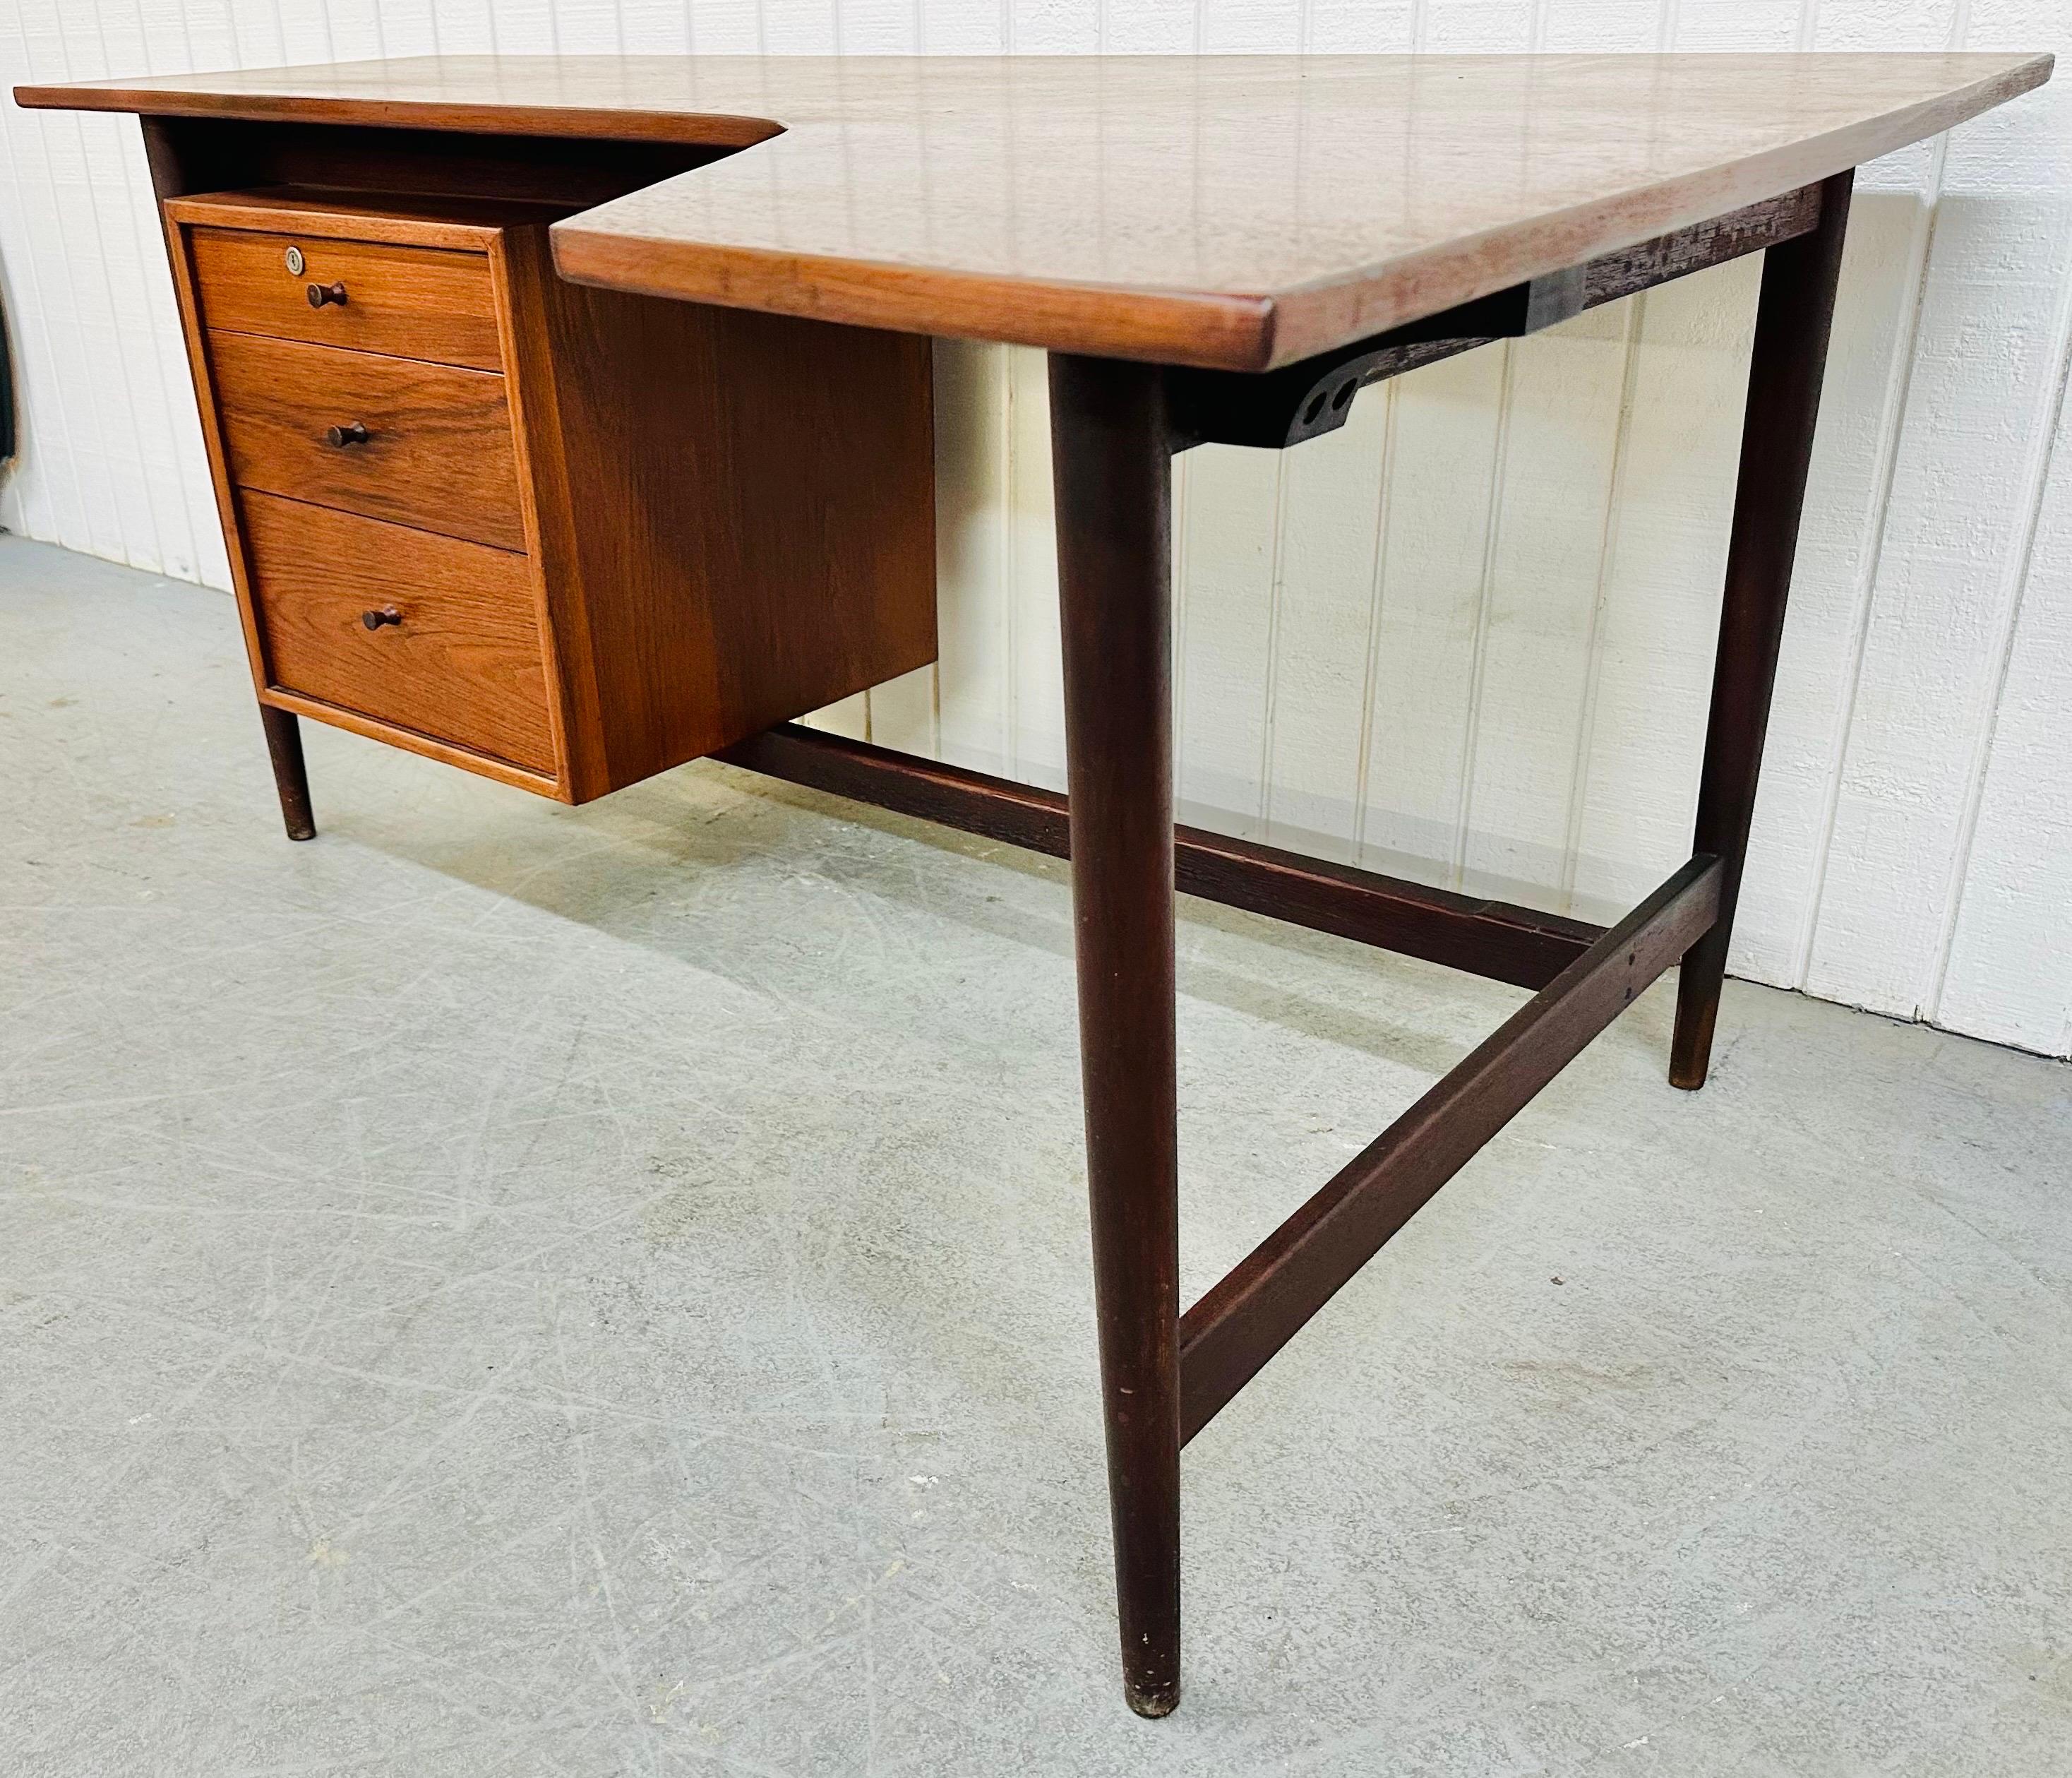 This listing is for an extremely rare Mid-Century Modern Richard Artschwager Walnut Studio Desk. Featuring a right corner boomerang style design, floating three drawer cabinet, four legs, original pulls, and a beautiful walnut finish. This is an